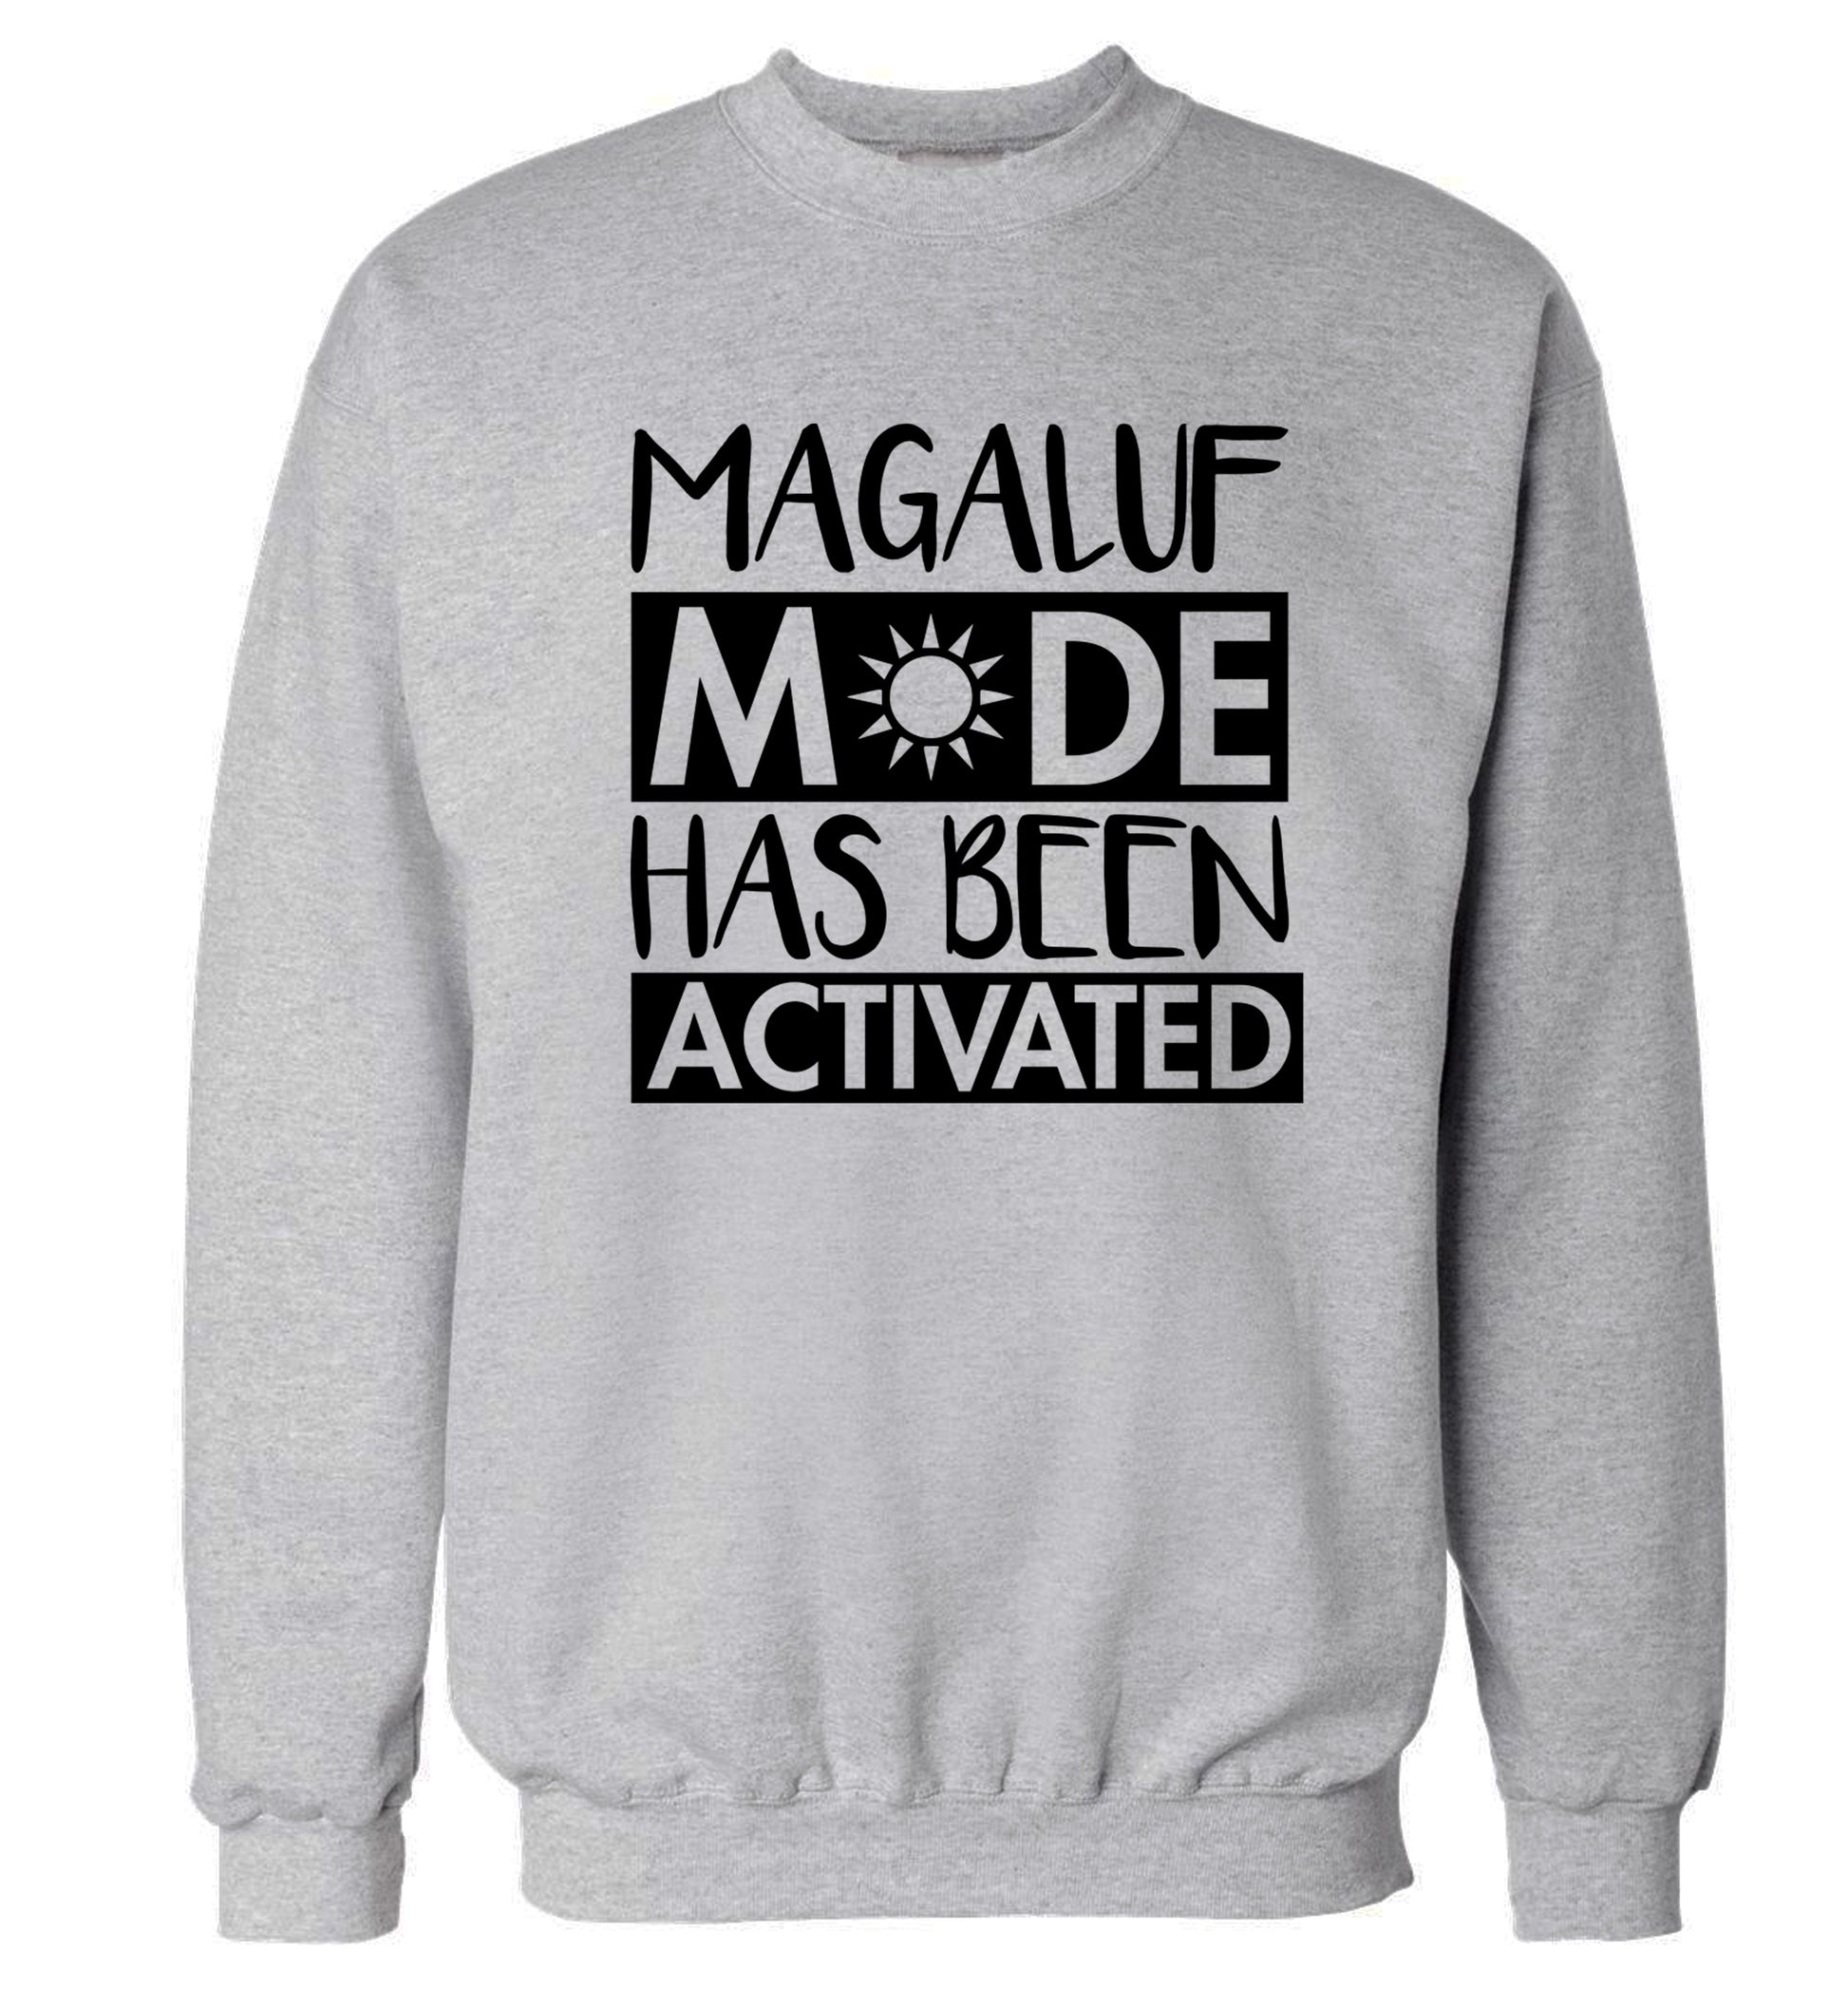 Magaluf mode has been activated Adult's unisex grey Sweater 2XL